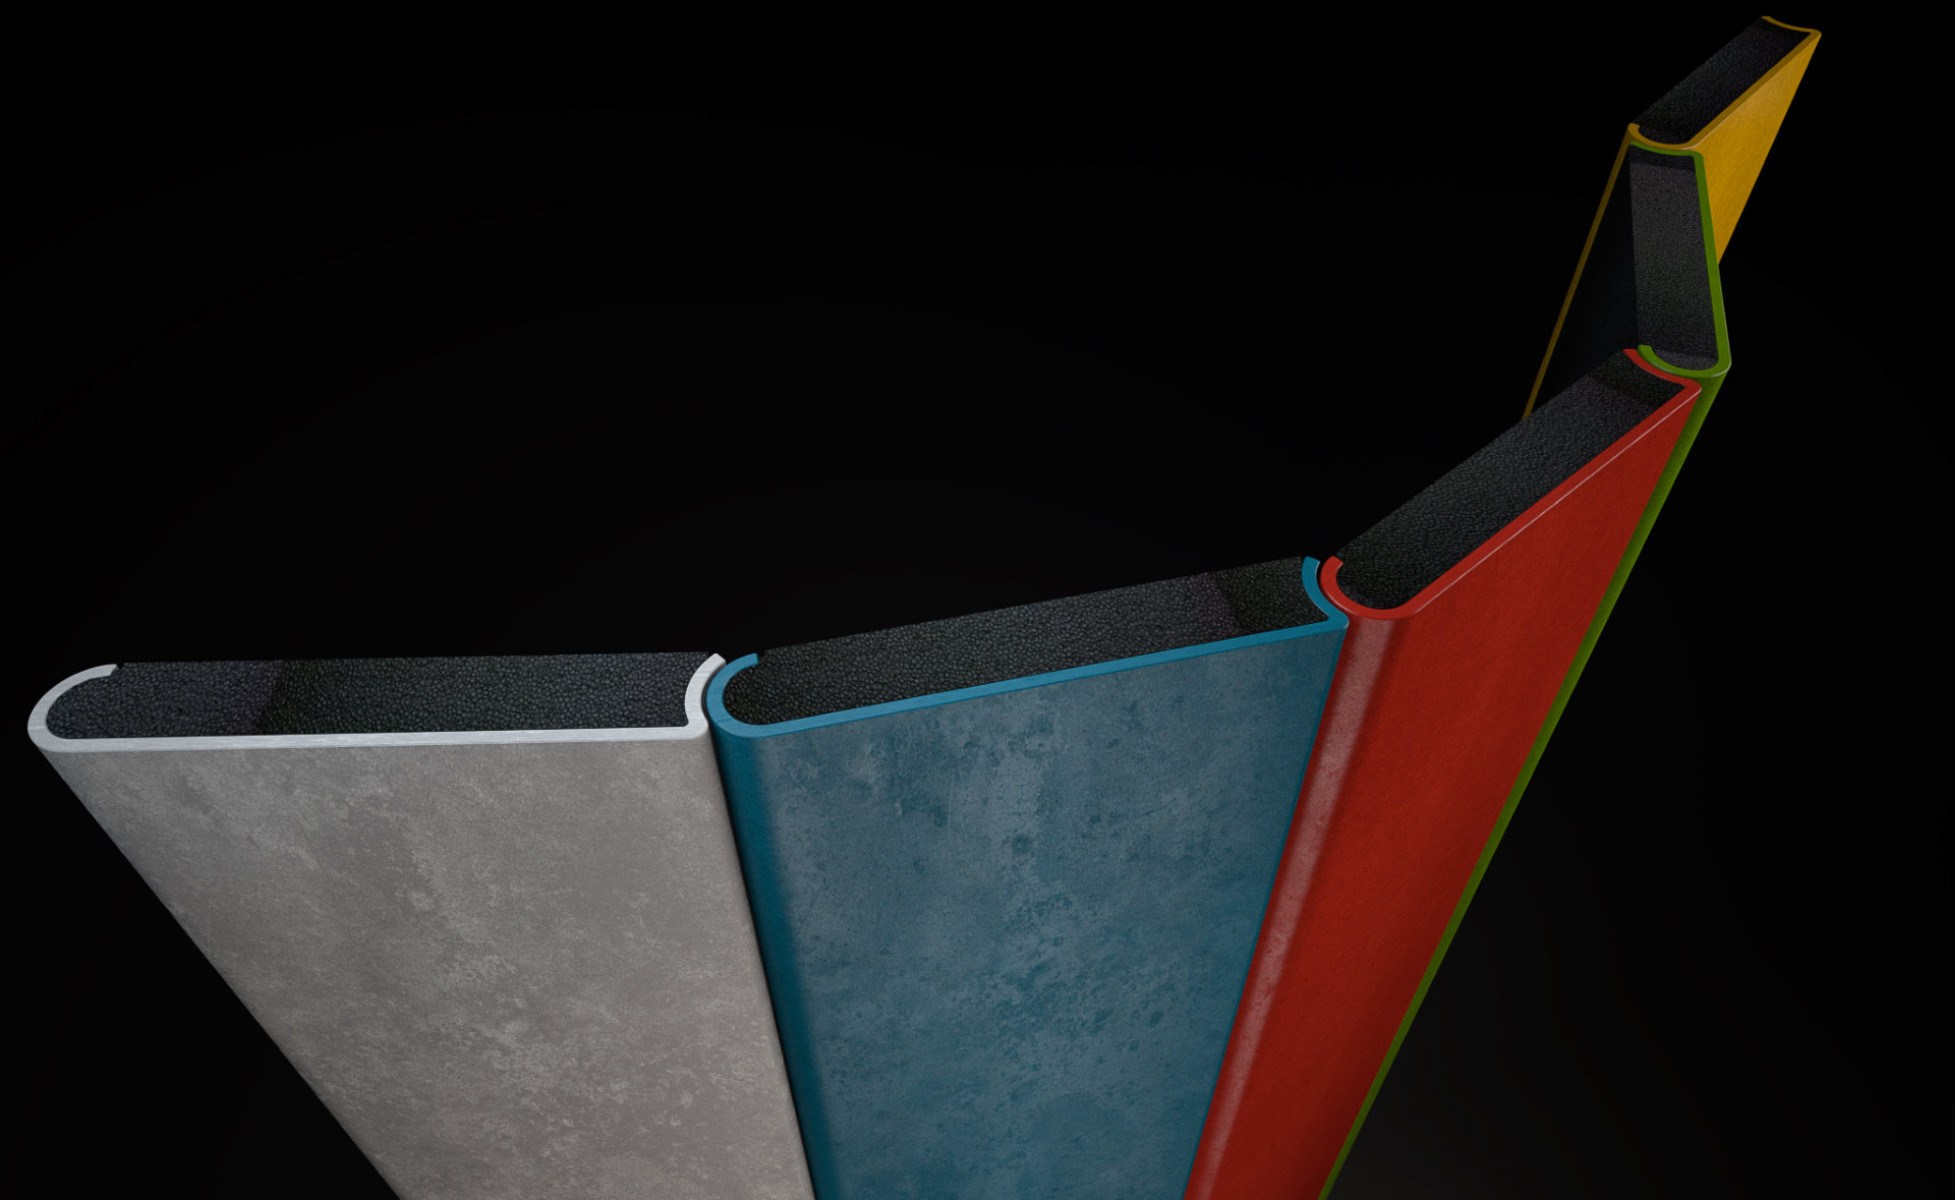 five c--c profiles in fiber cement in stong colors with its characteristic surface structures.